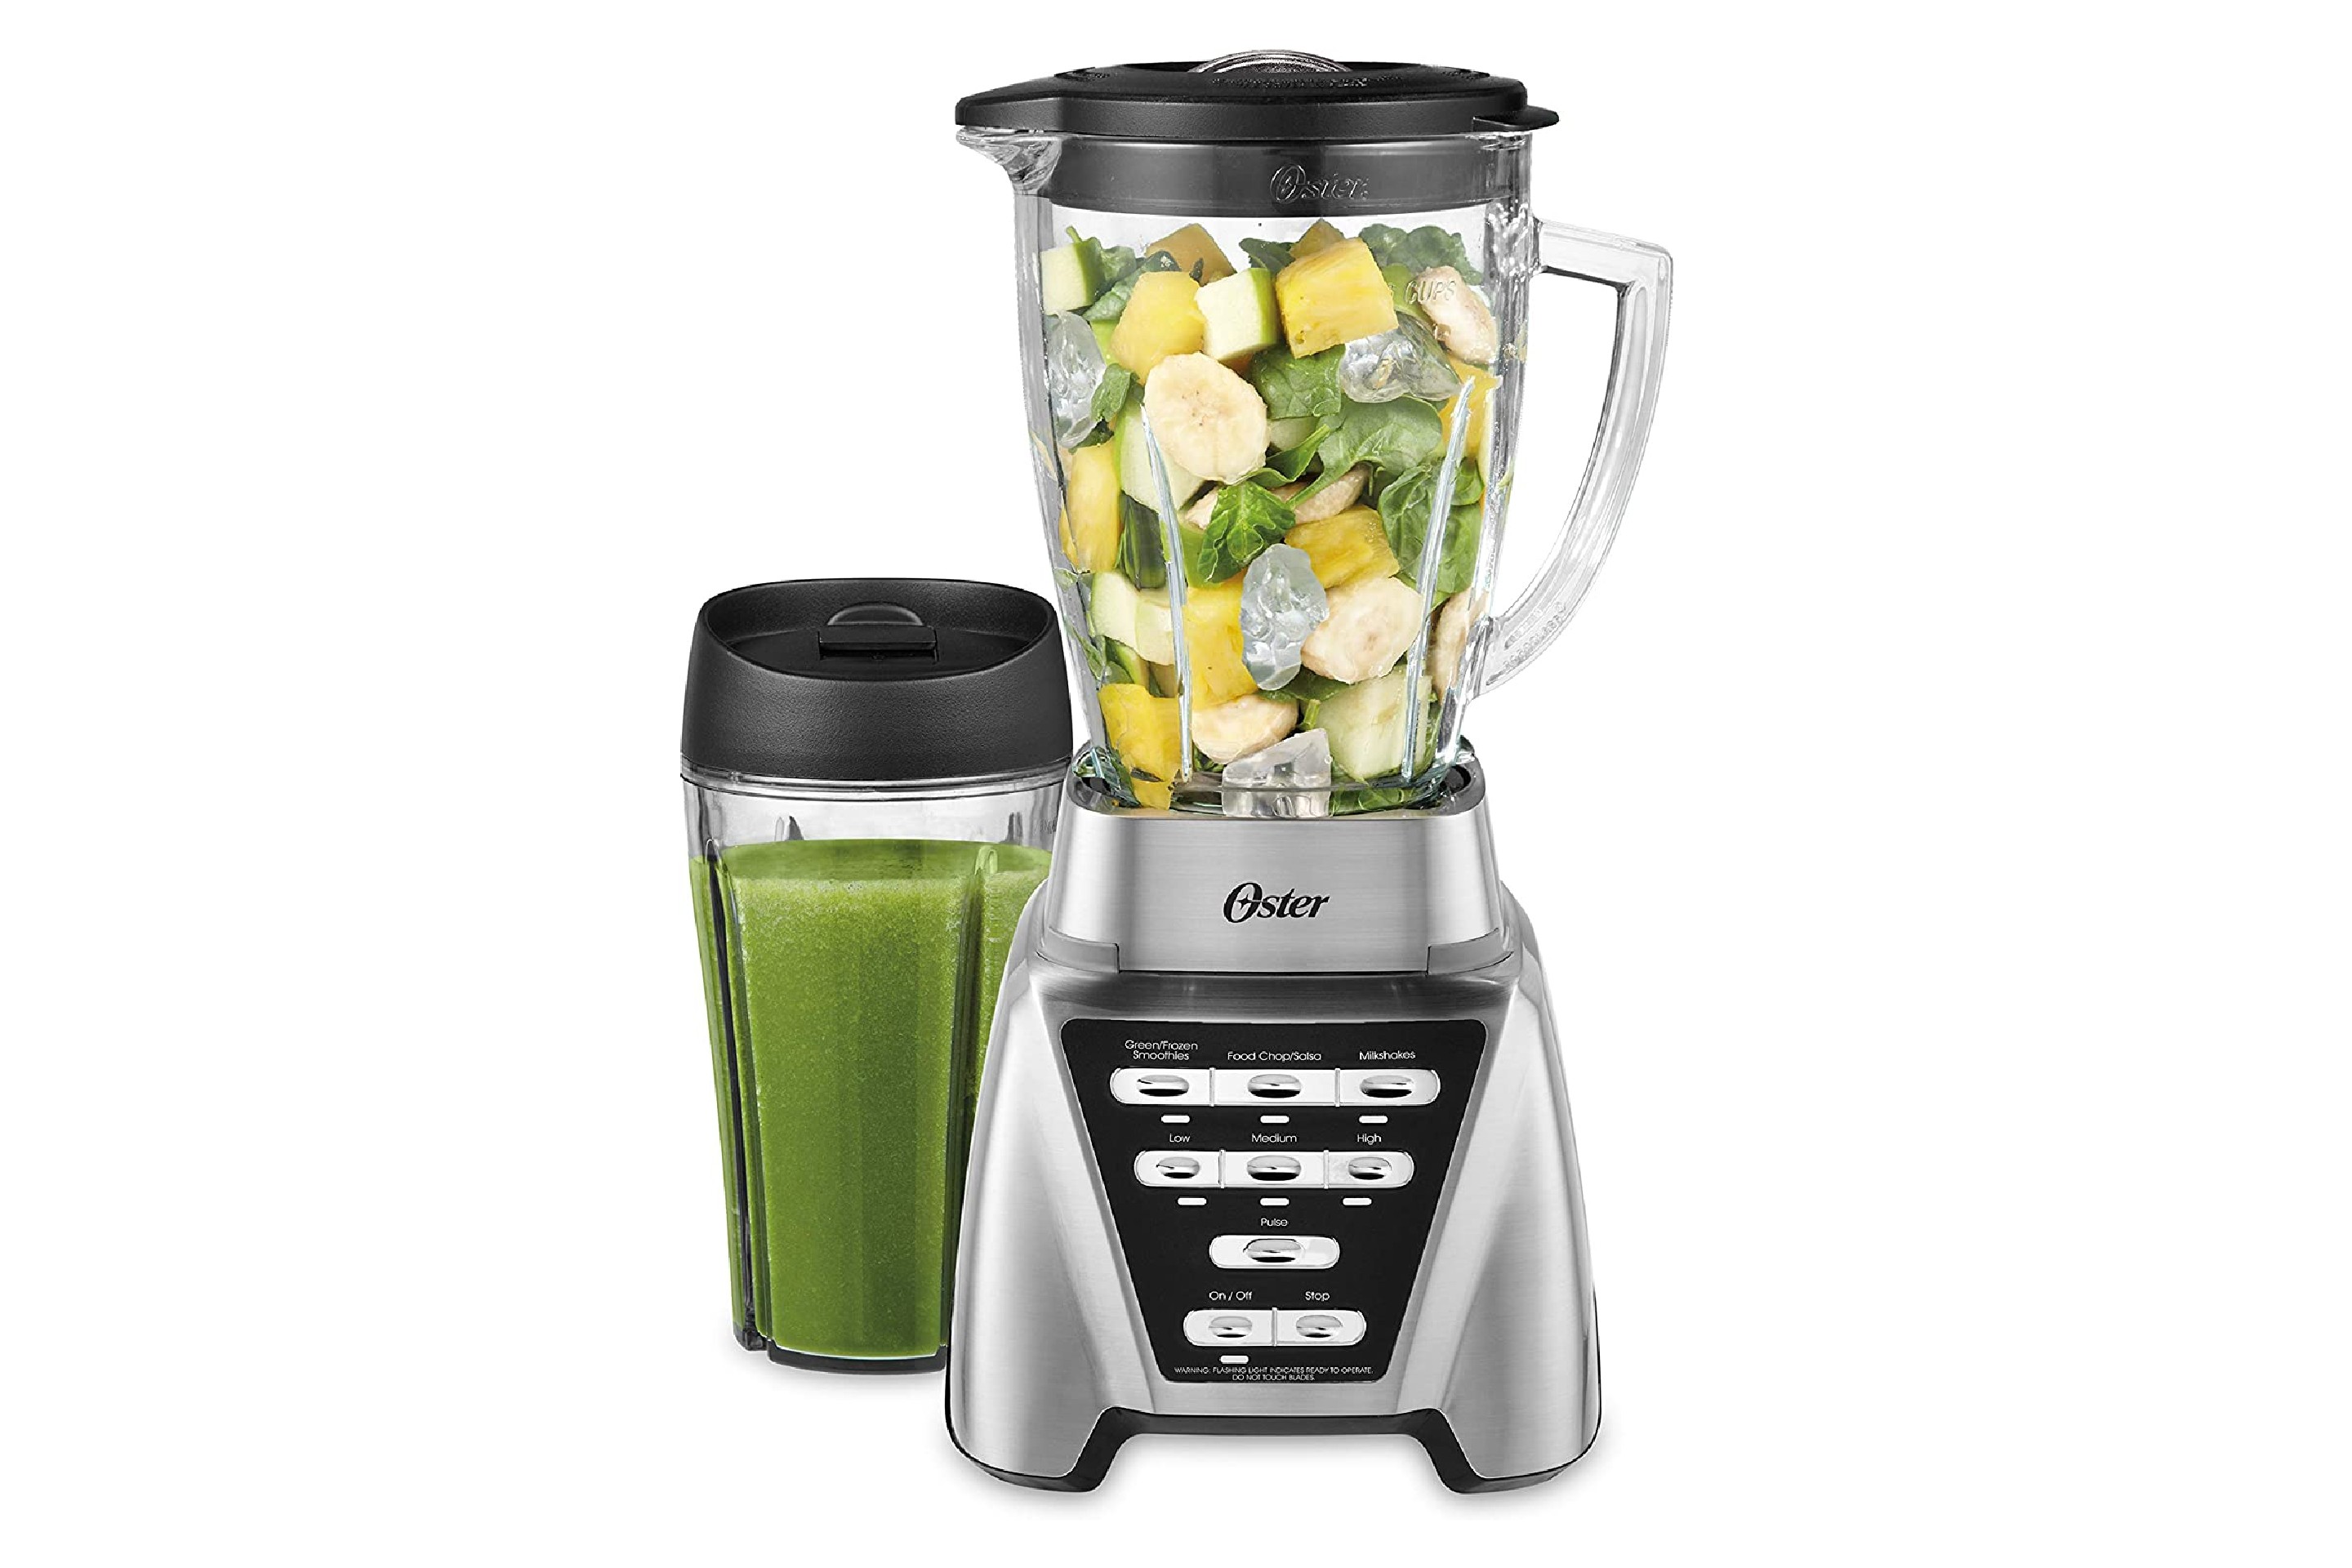 The Best Blenders for Smoothies